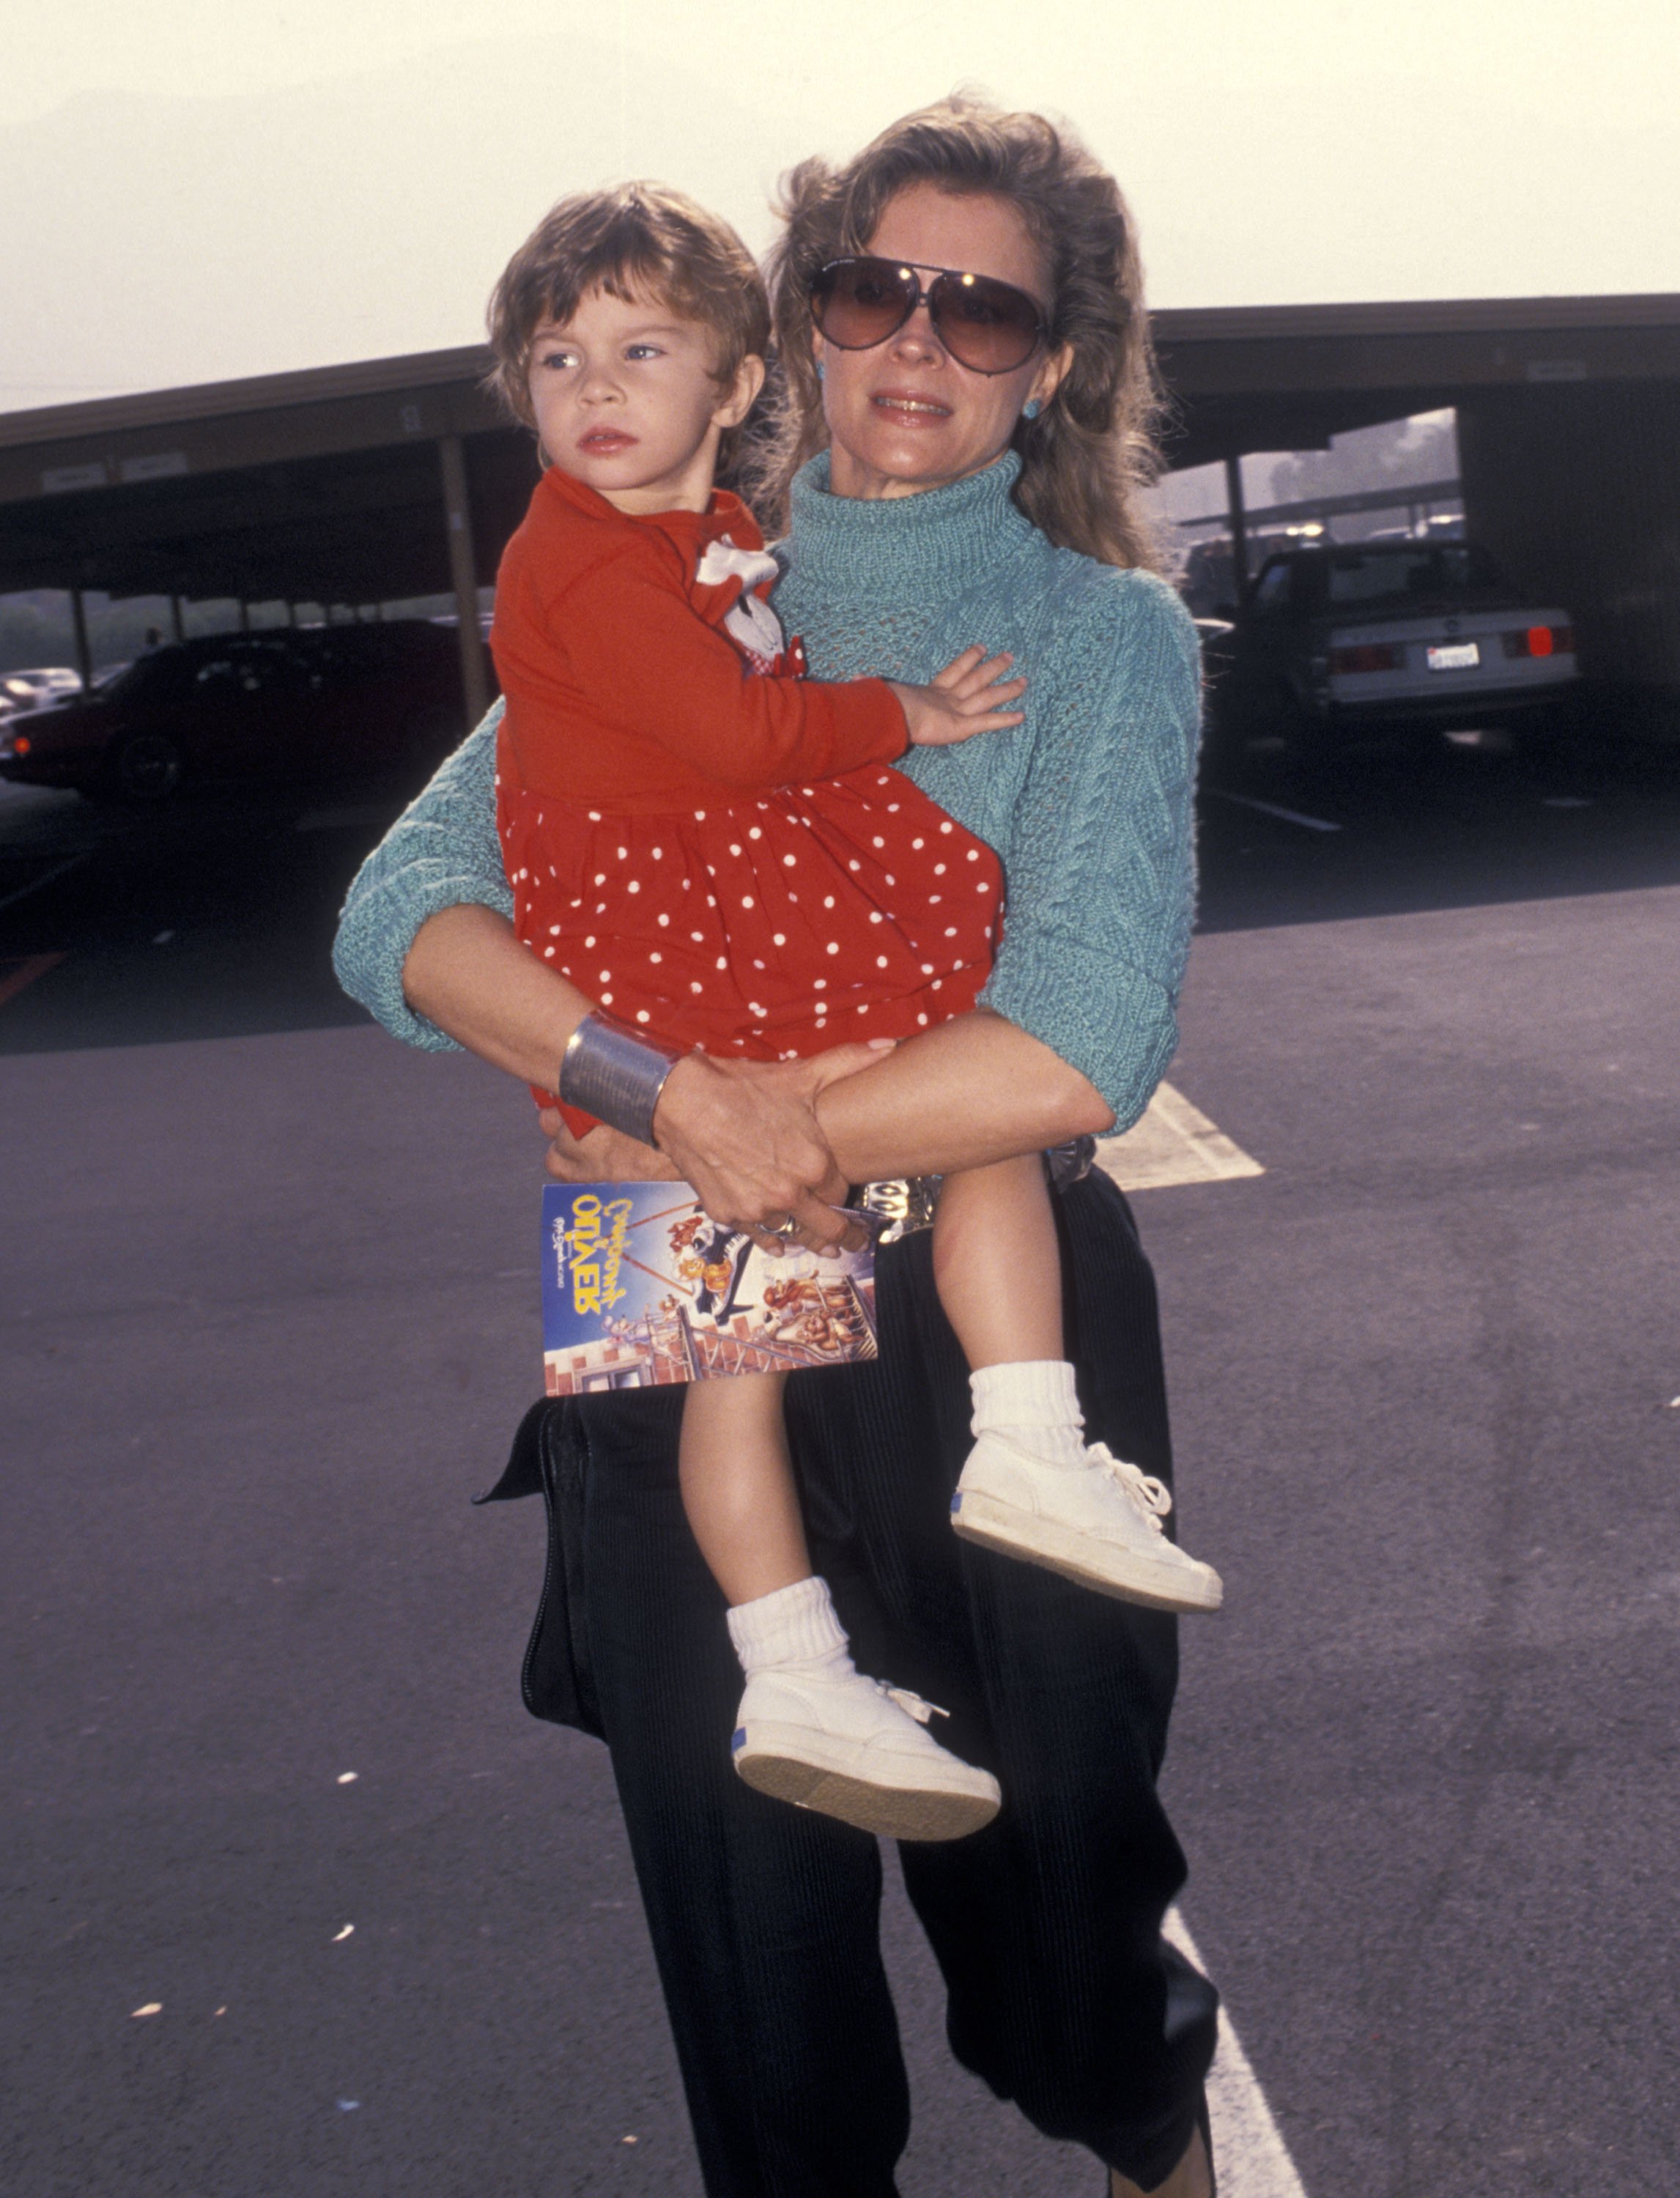 Candice Bergen and her daughter Chloe Malle in California 1988. | Source: Getty Images 